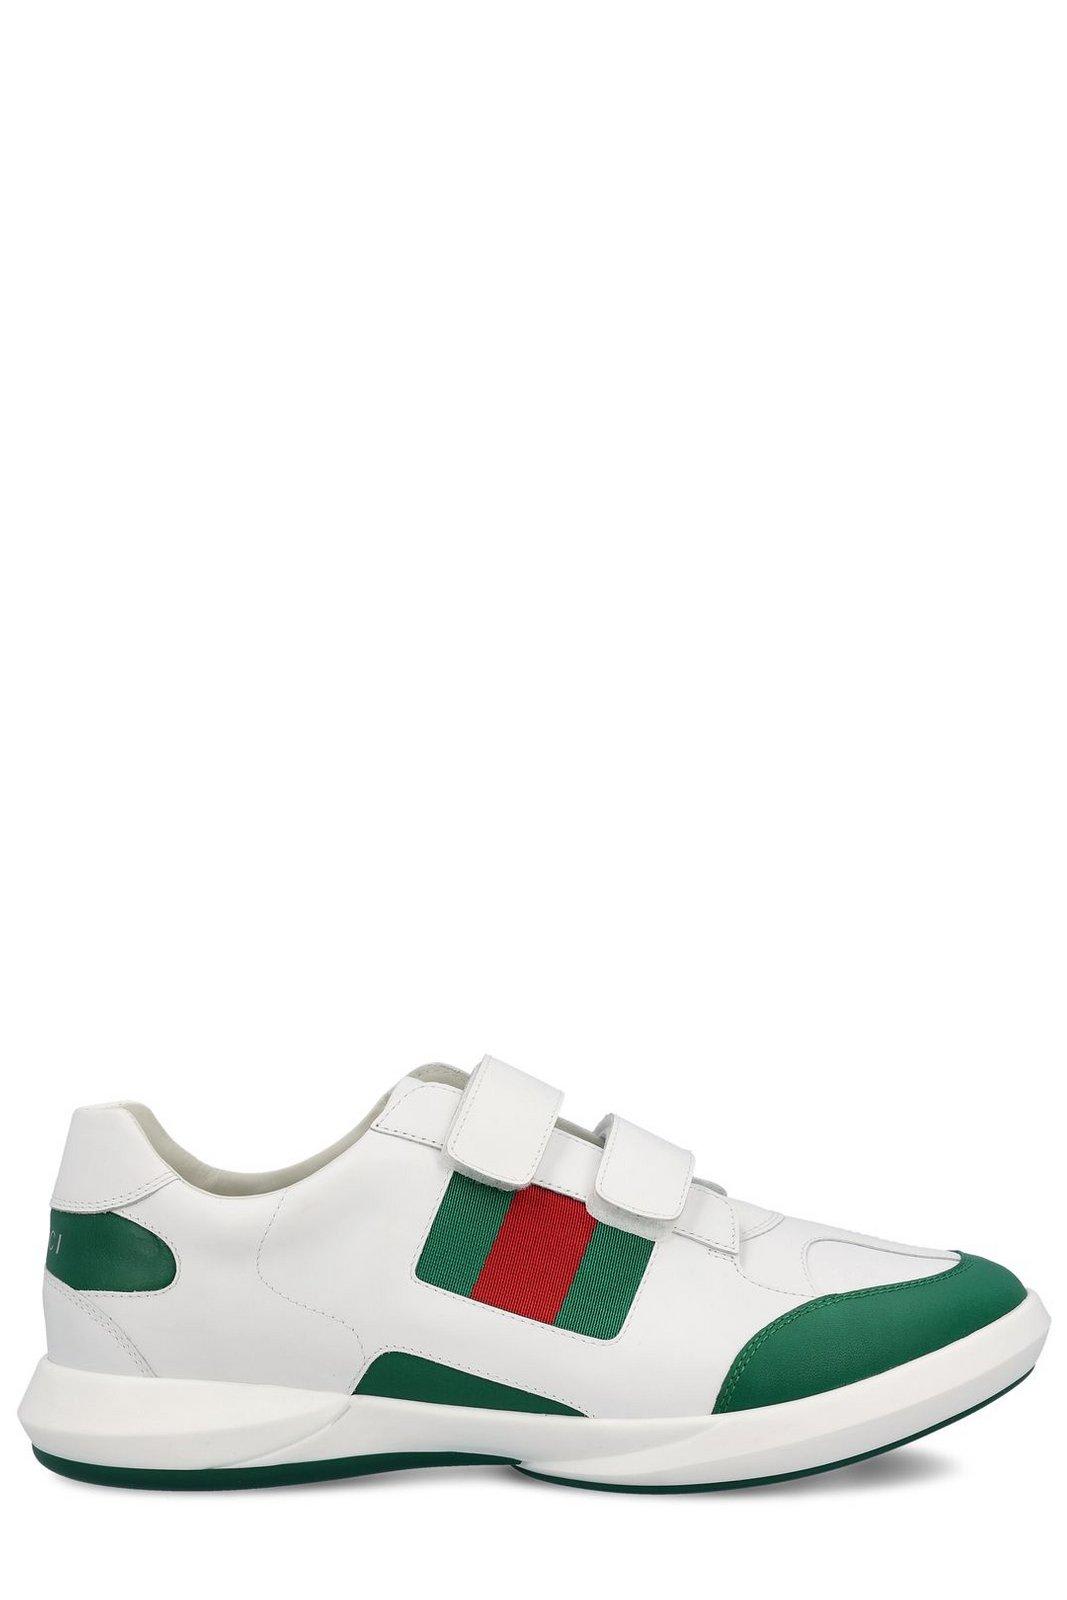 Shop Gucci Ace Web Details Trainers In White